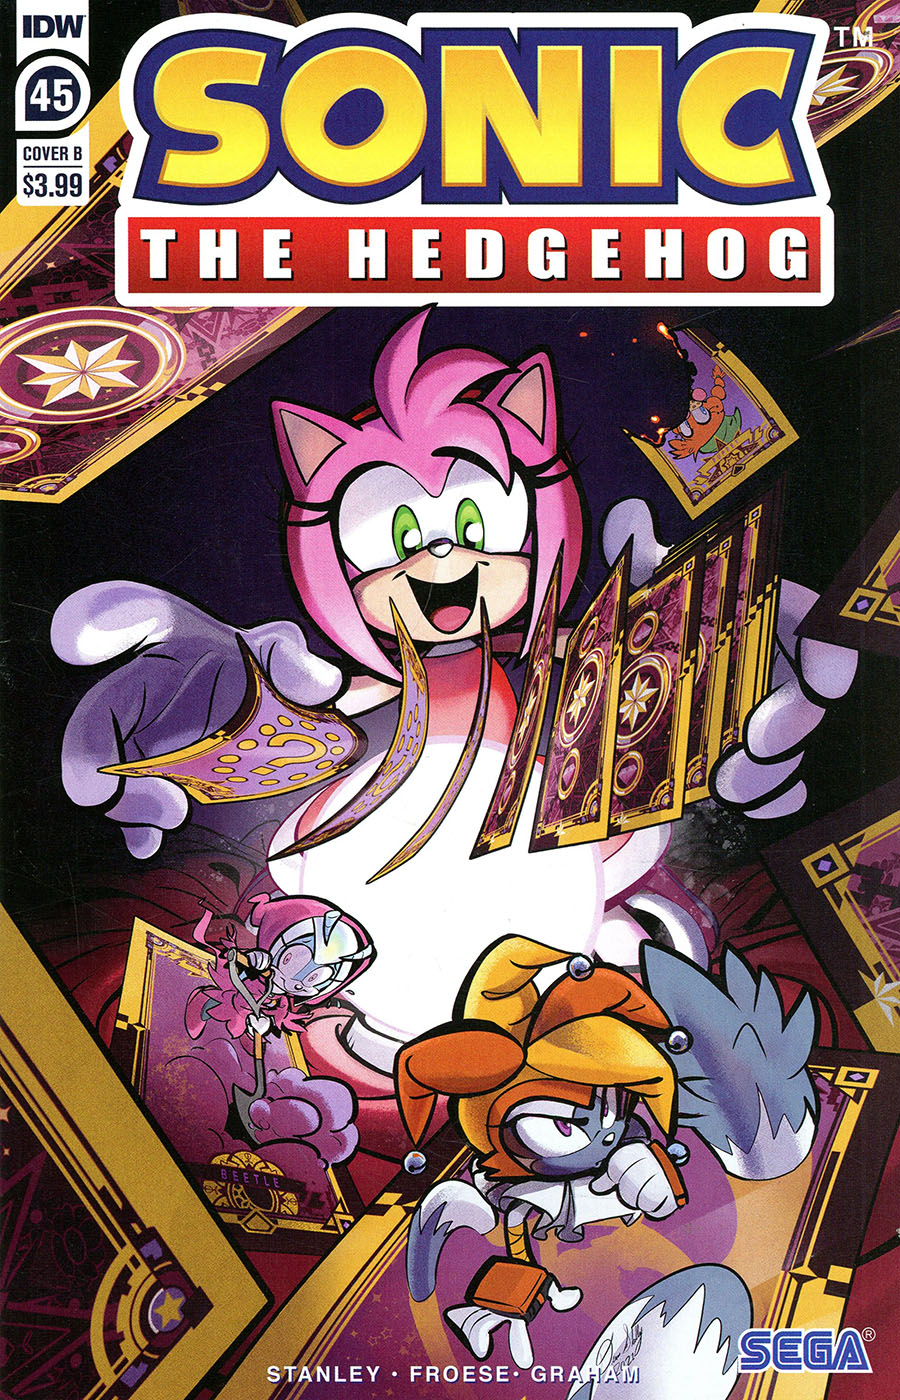 Sonic The Hedgehog Vol 3 #45 Cover B Variant Diana Skelley Cover